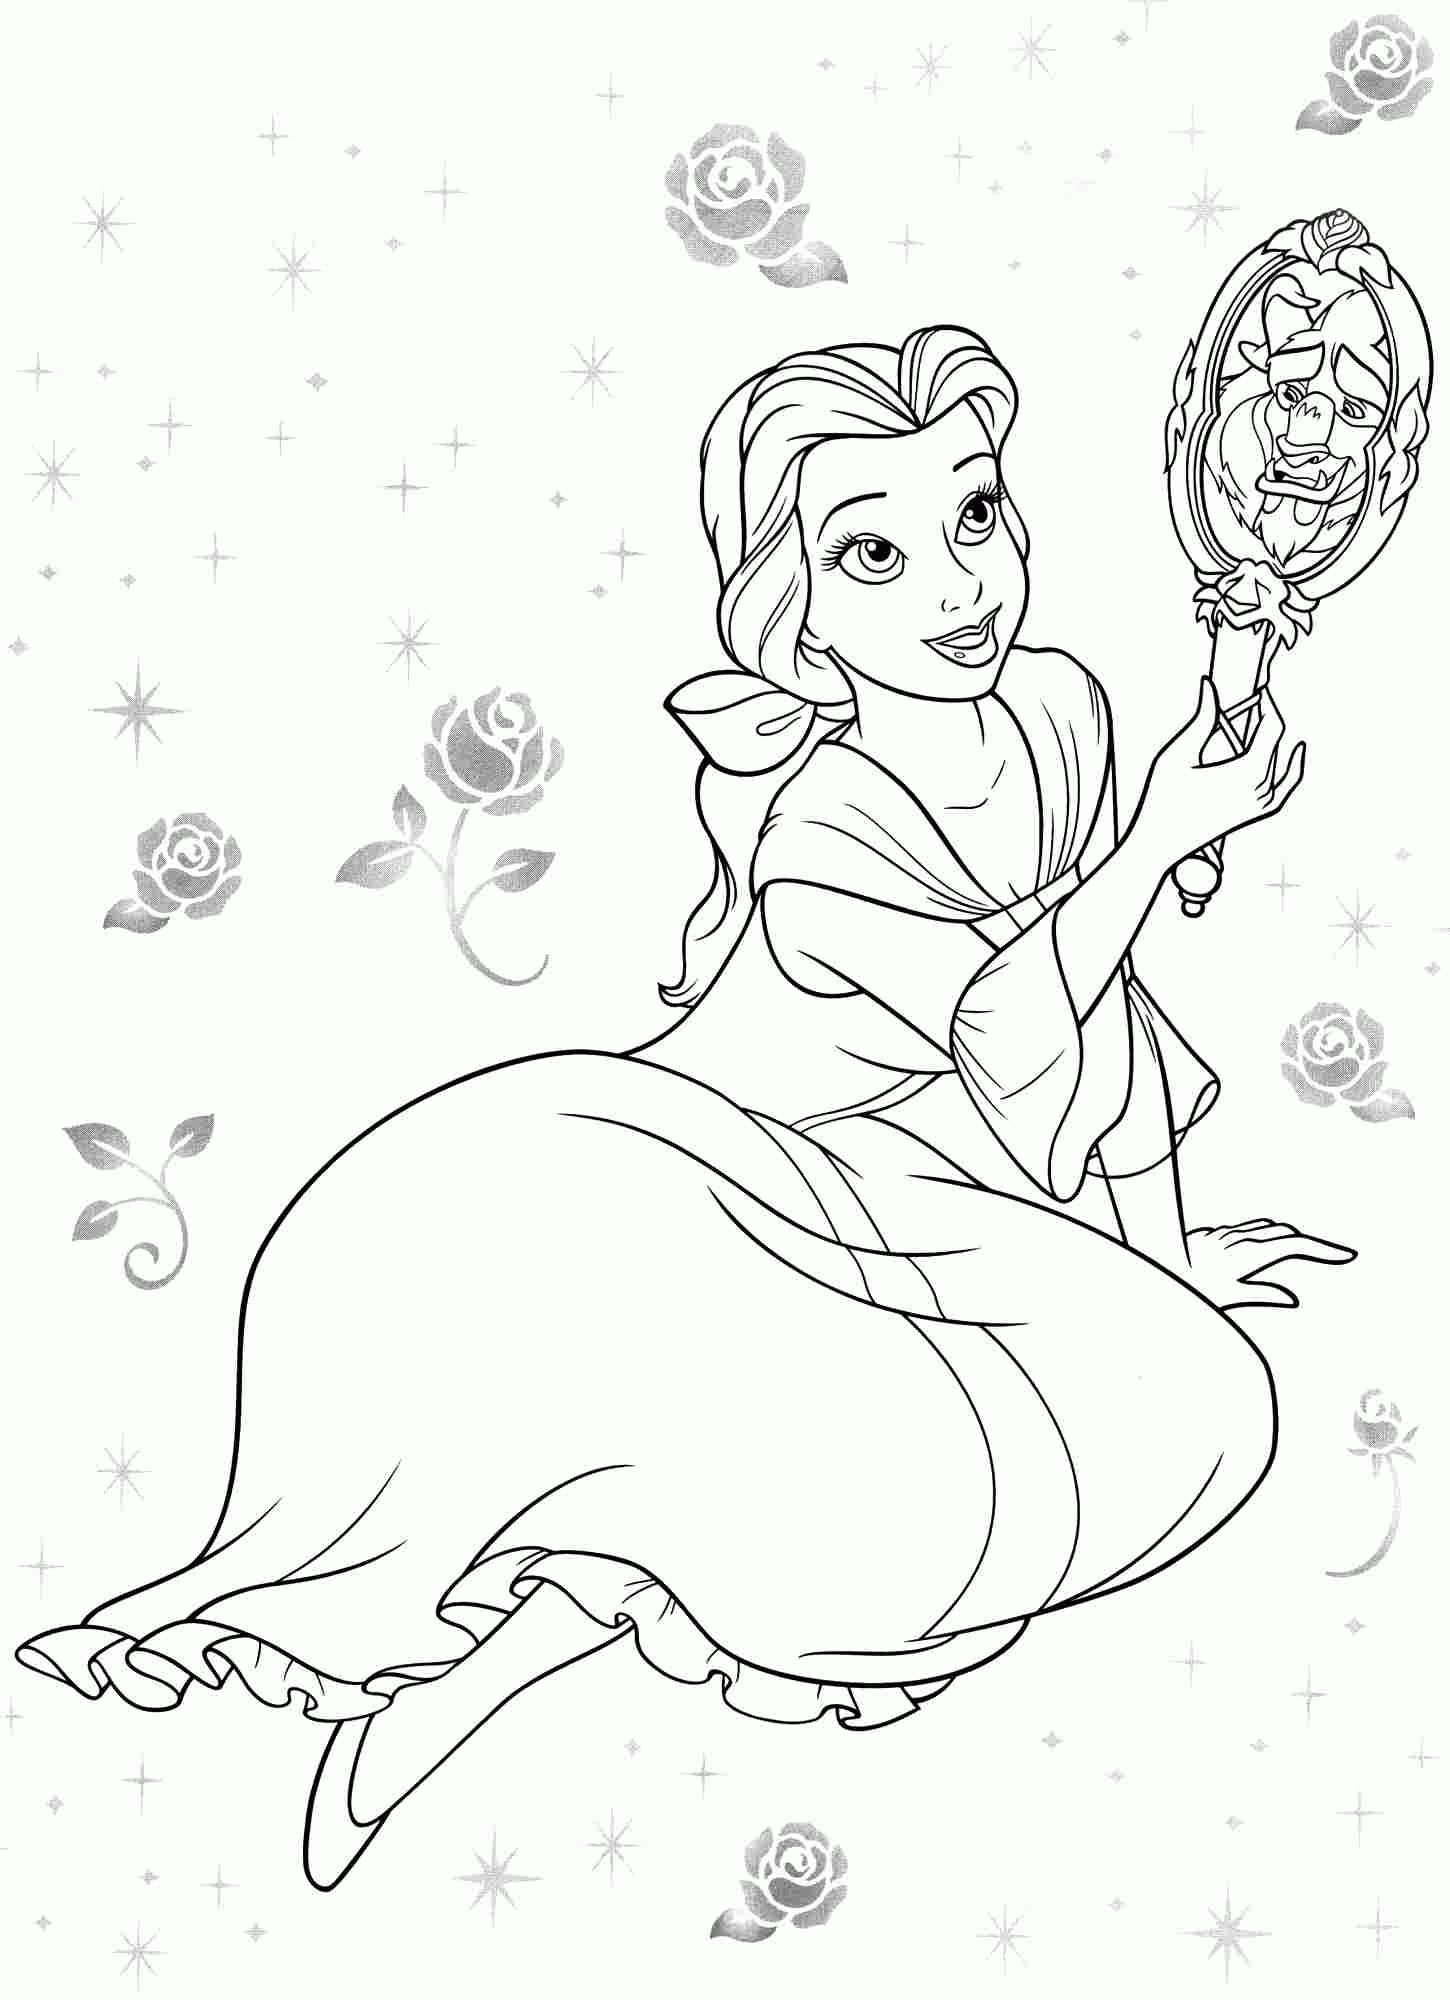 Disney Coloring Pages Belle - Coloring Home